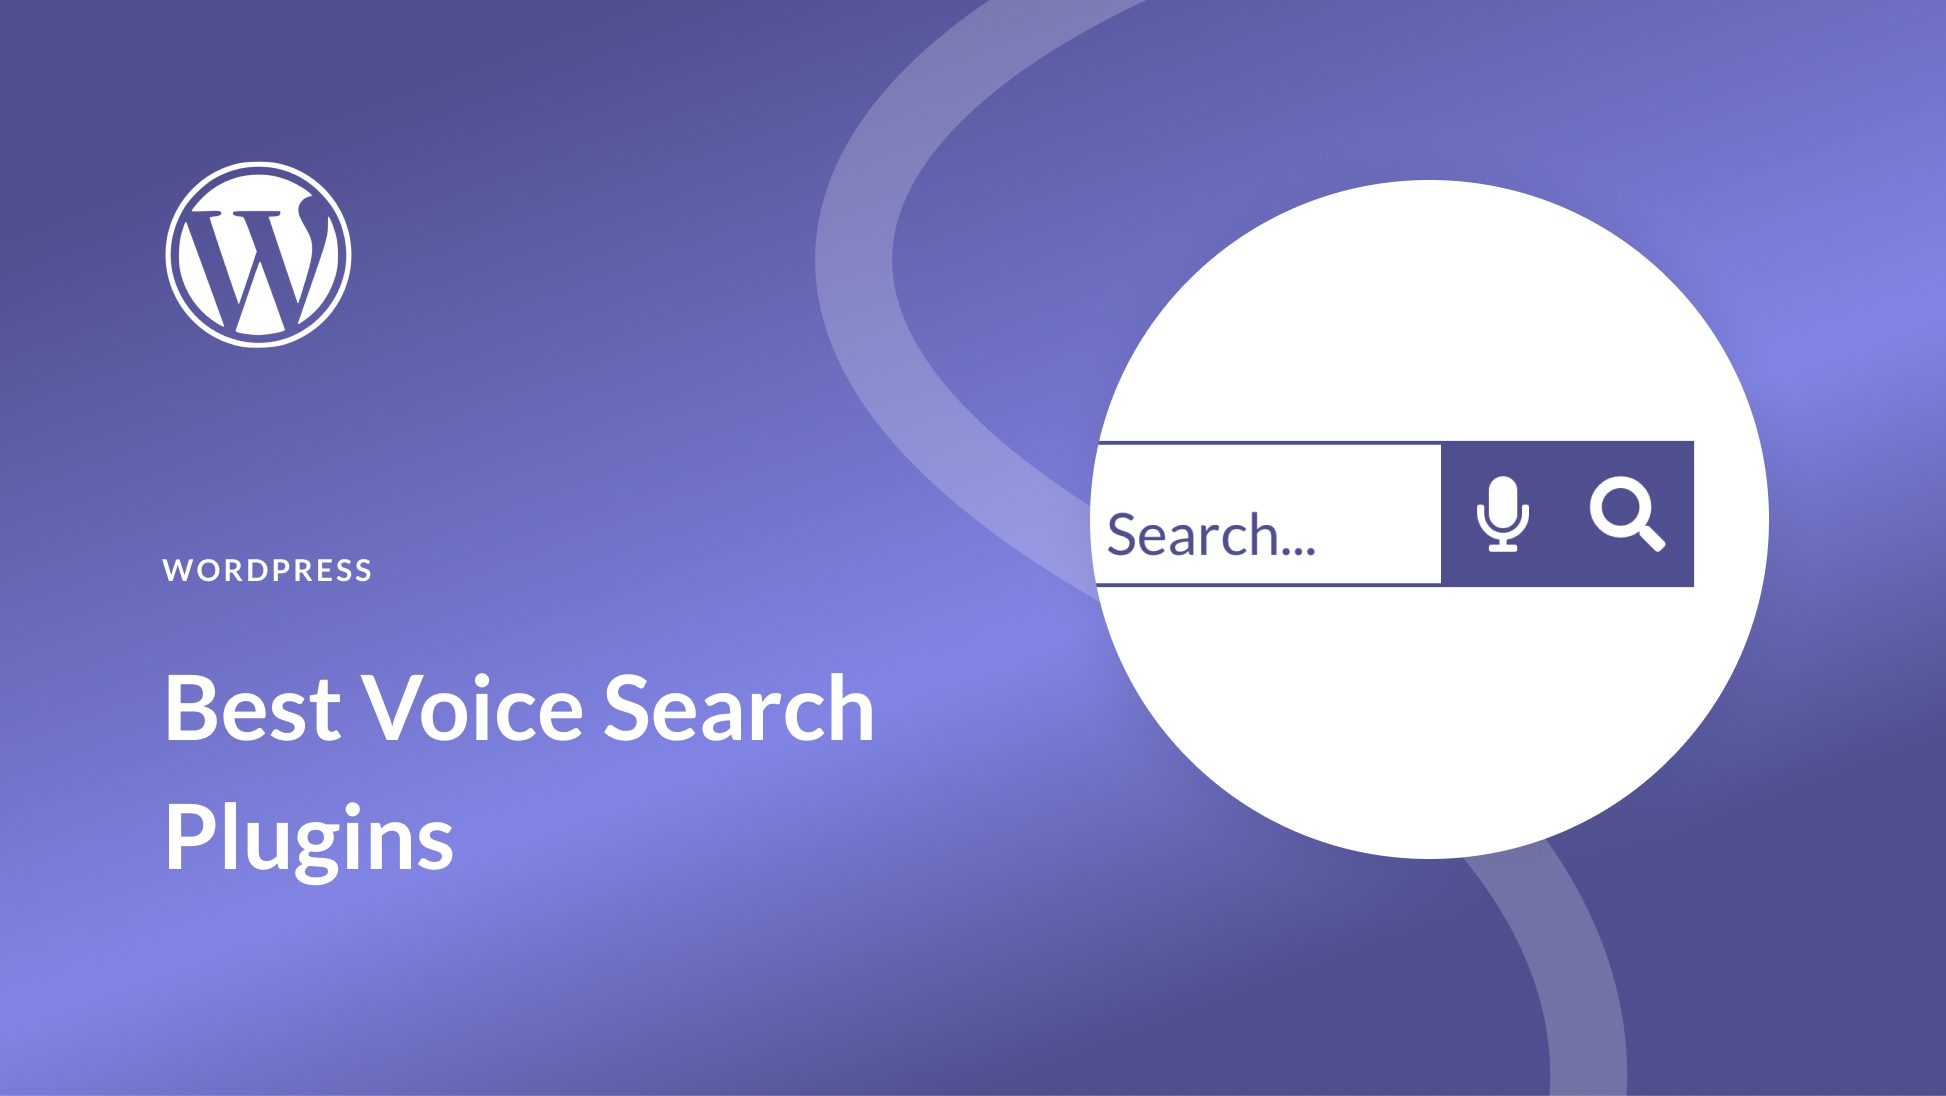 3 Best Voice Search Plugins for WordPress